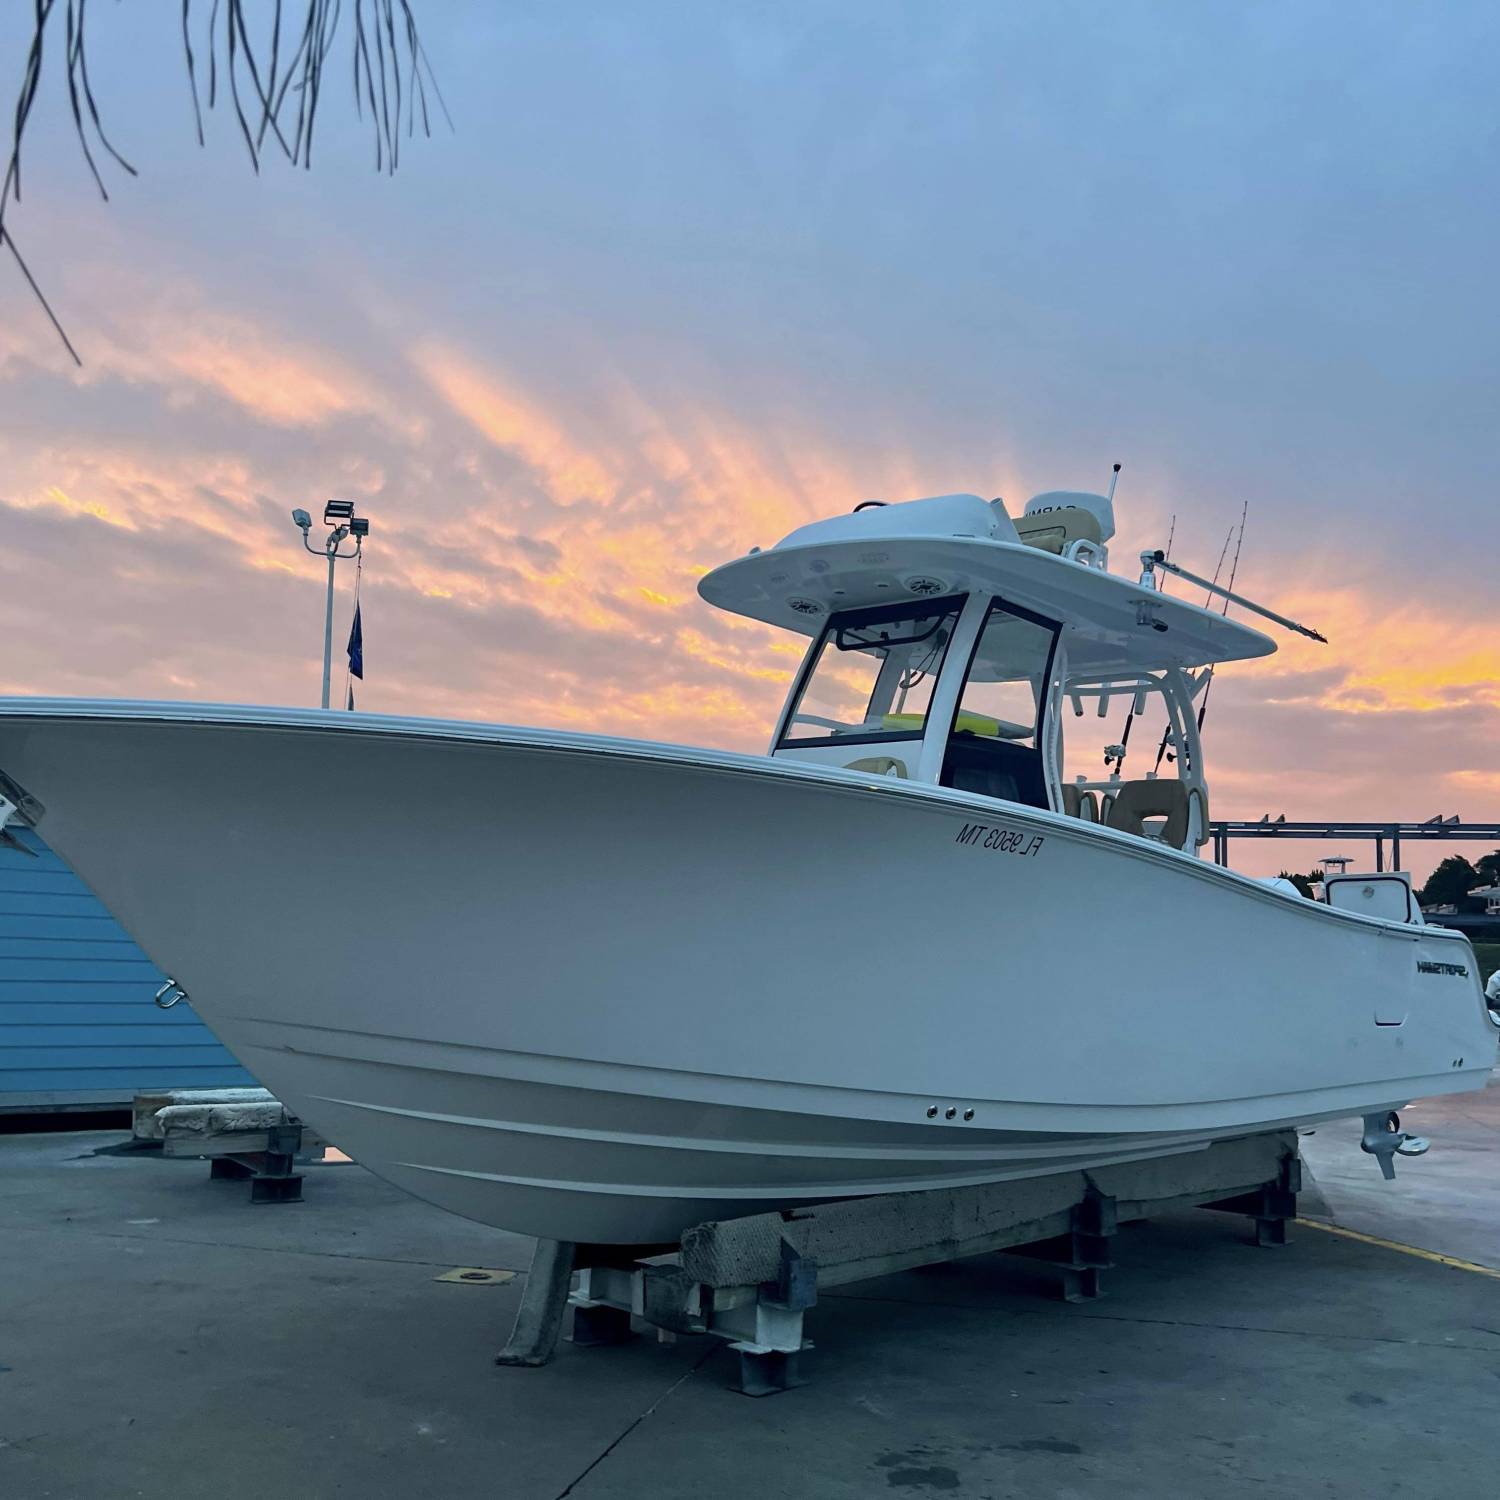 Title: 282TE - On board their Sportsman Open 282TE Center Console - Location: Legendary Marine. Participating in the Photo Contest #SportsmanMay2023